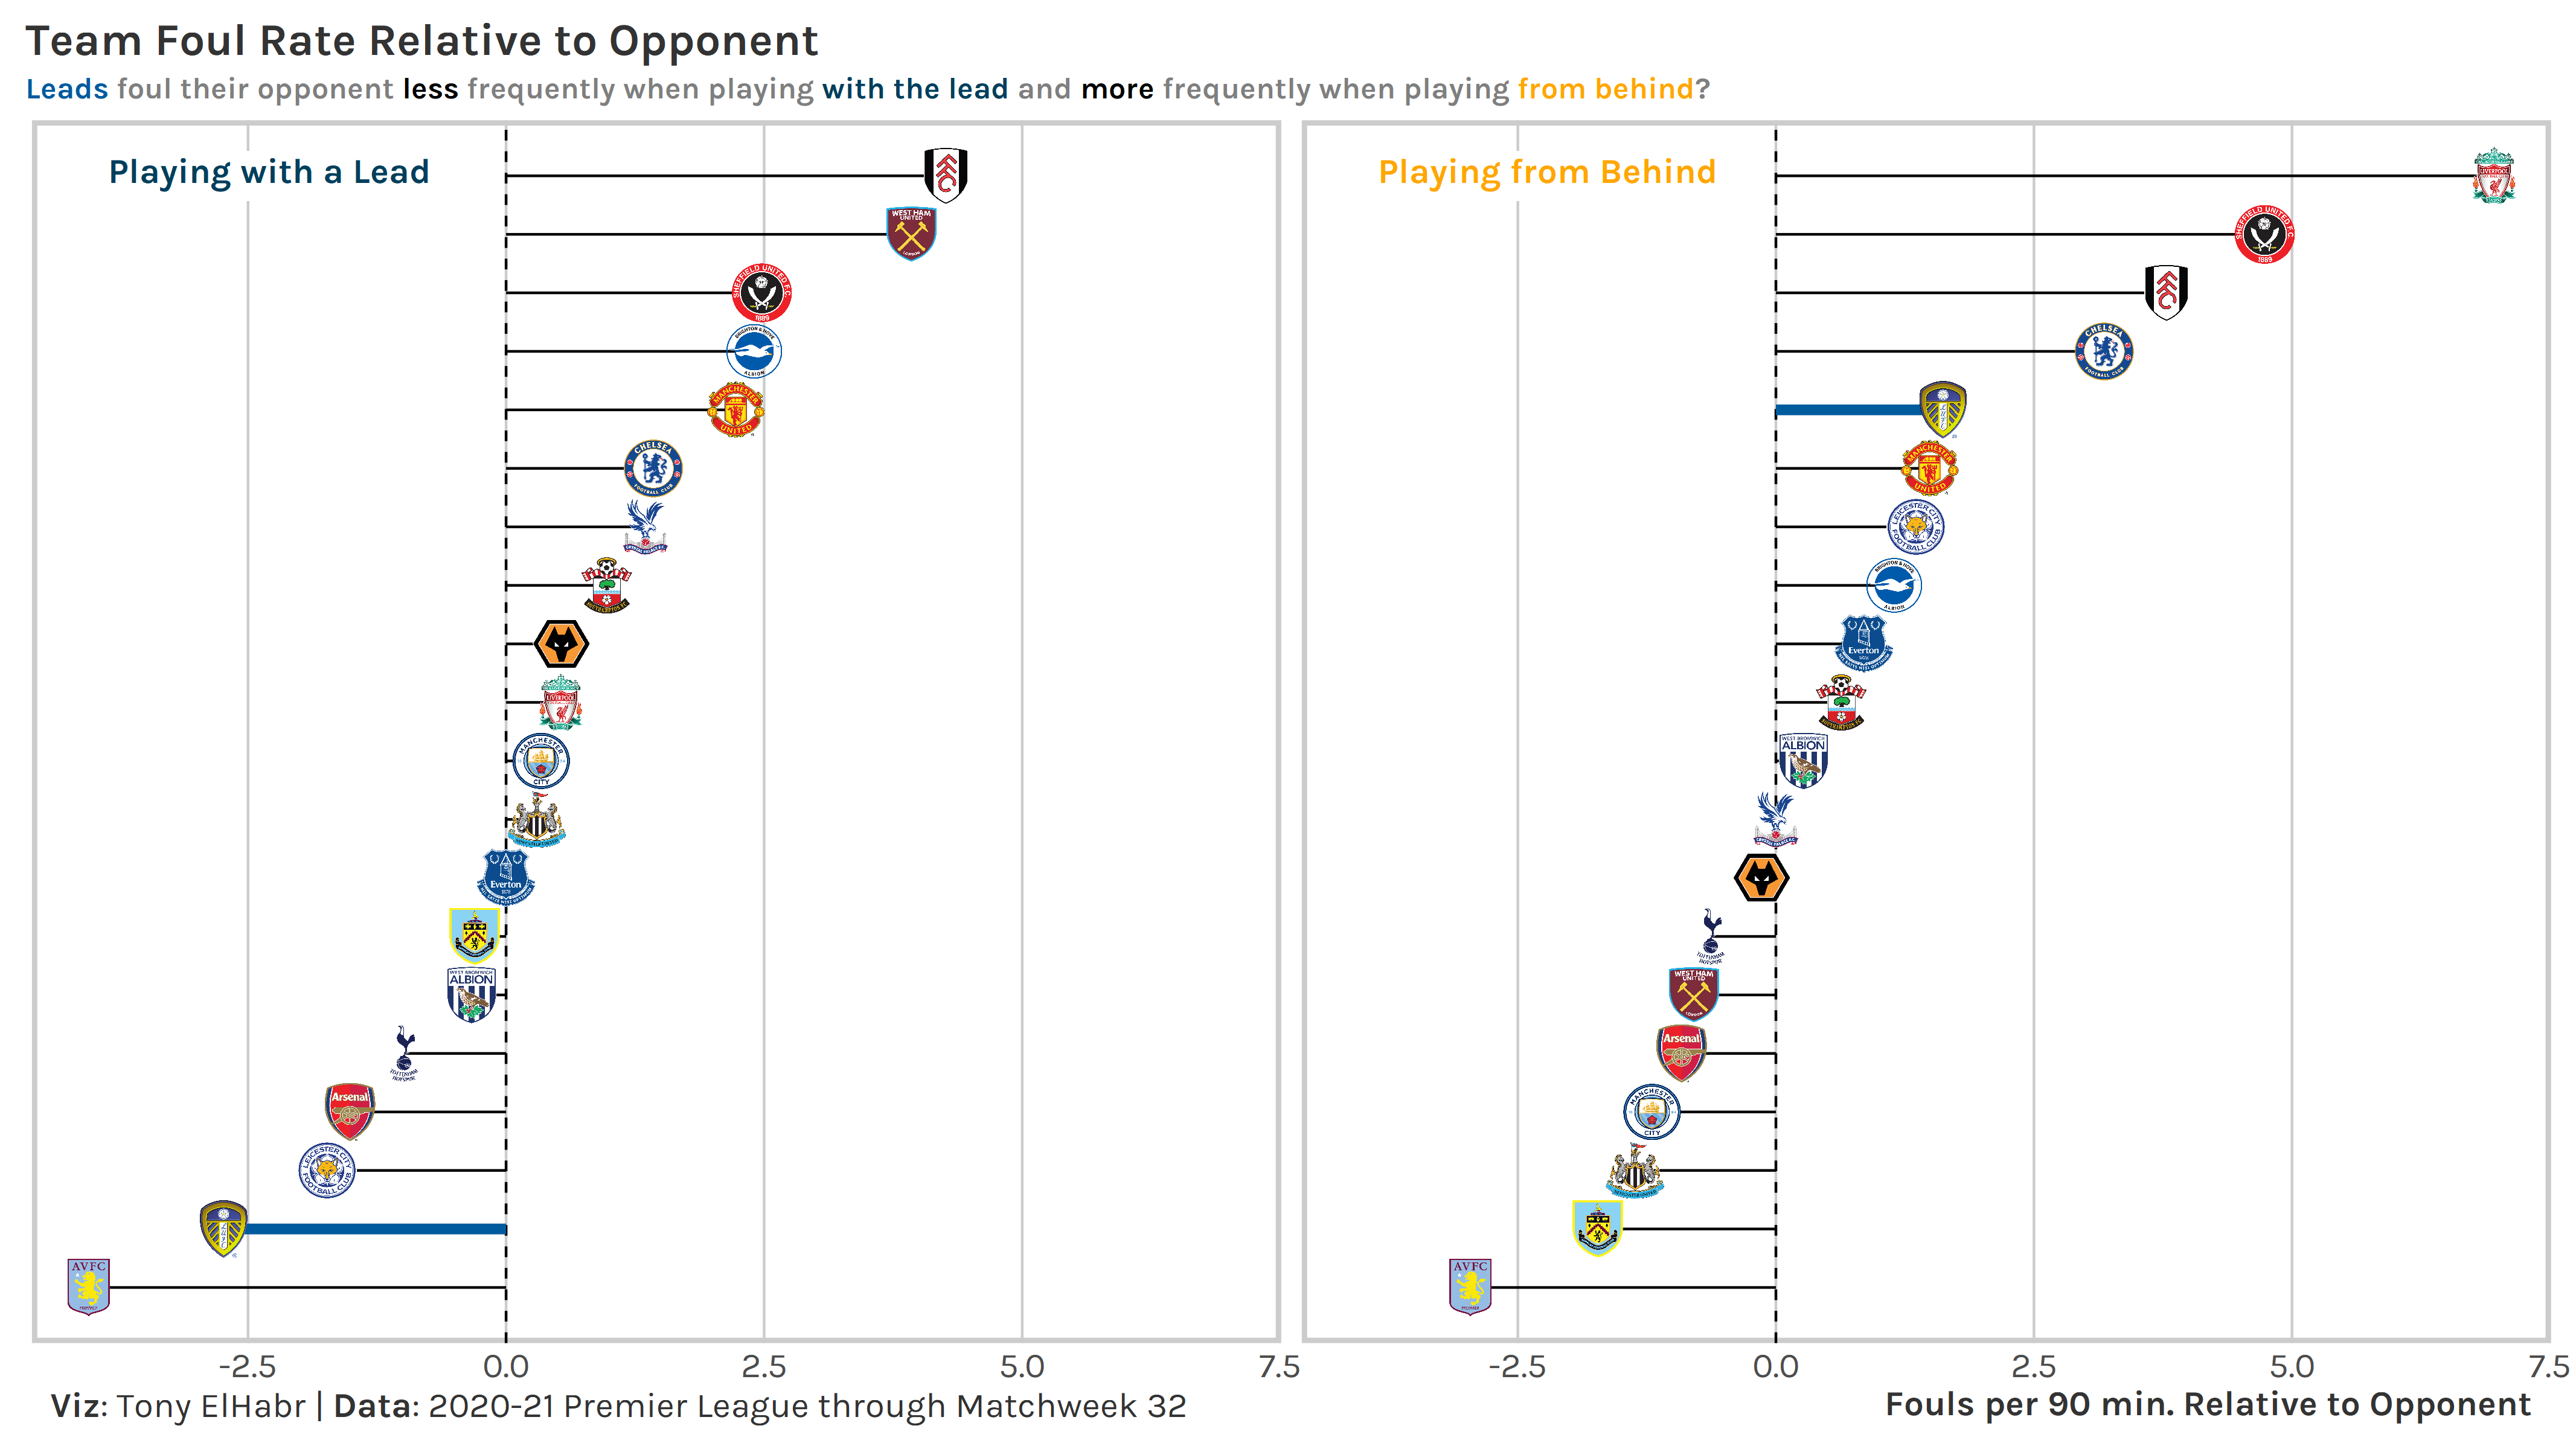 2020-21 EPL Team Fouling Rate Relative to Opponent by Game State